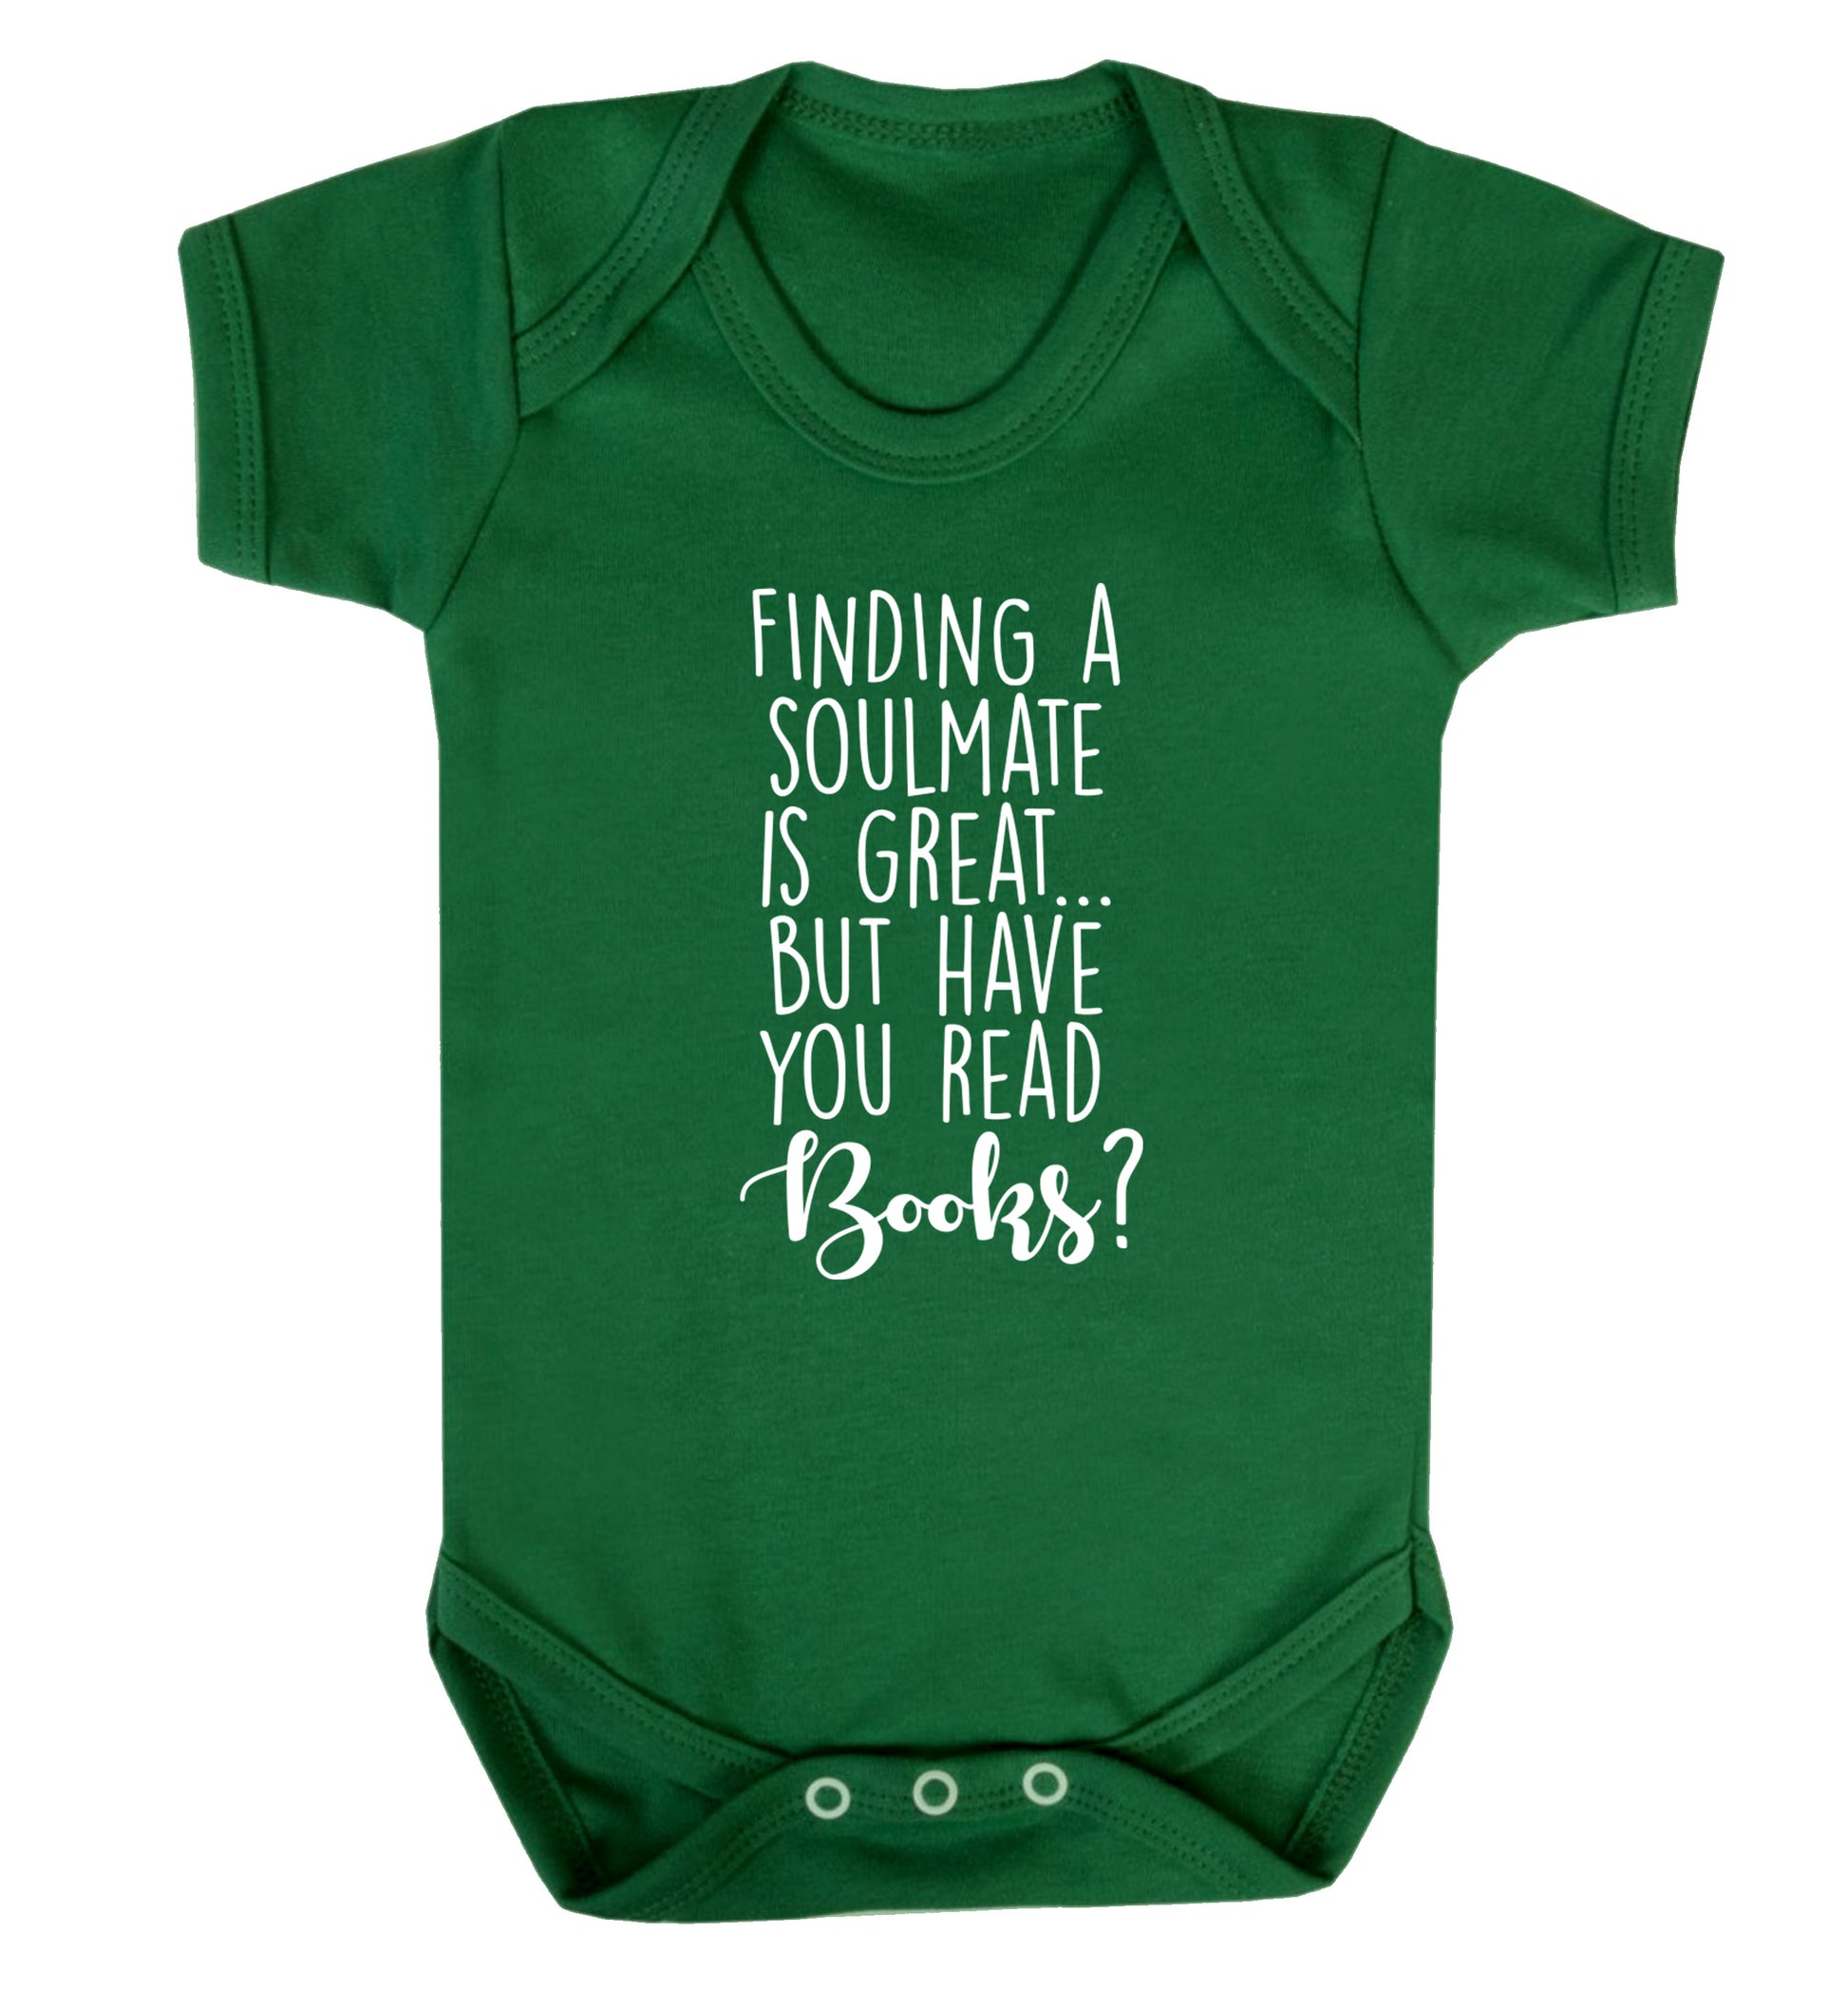 Finding a soulmate is great but have you read books? Baby Vest green 18-24 months